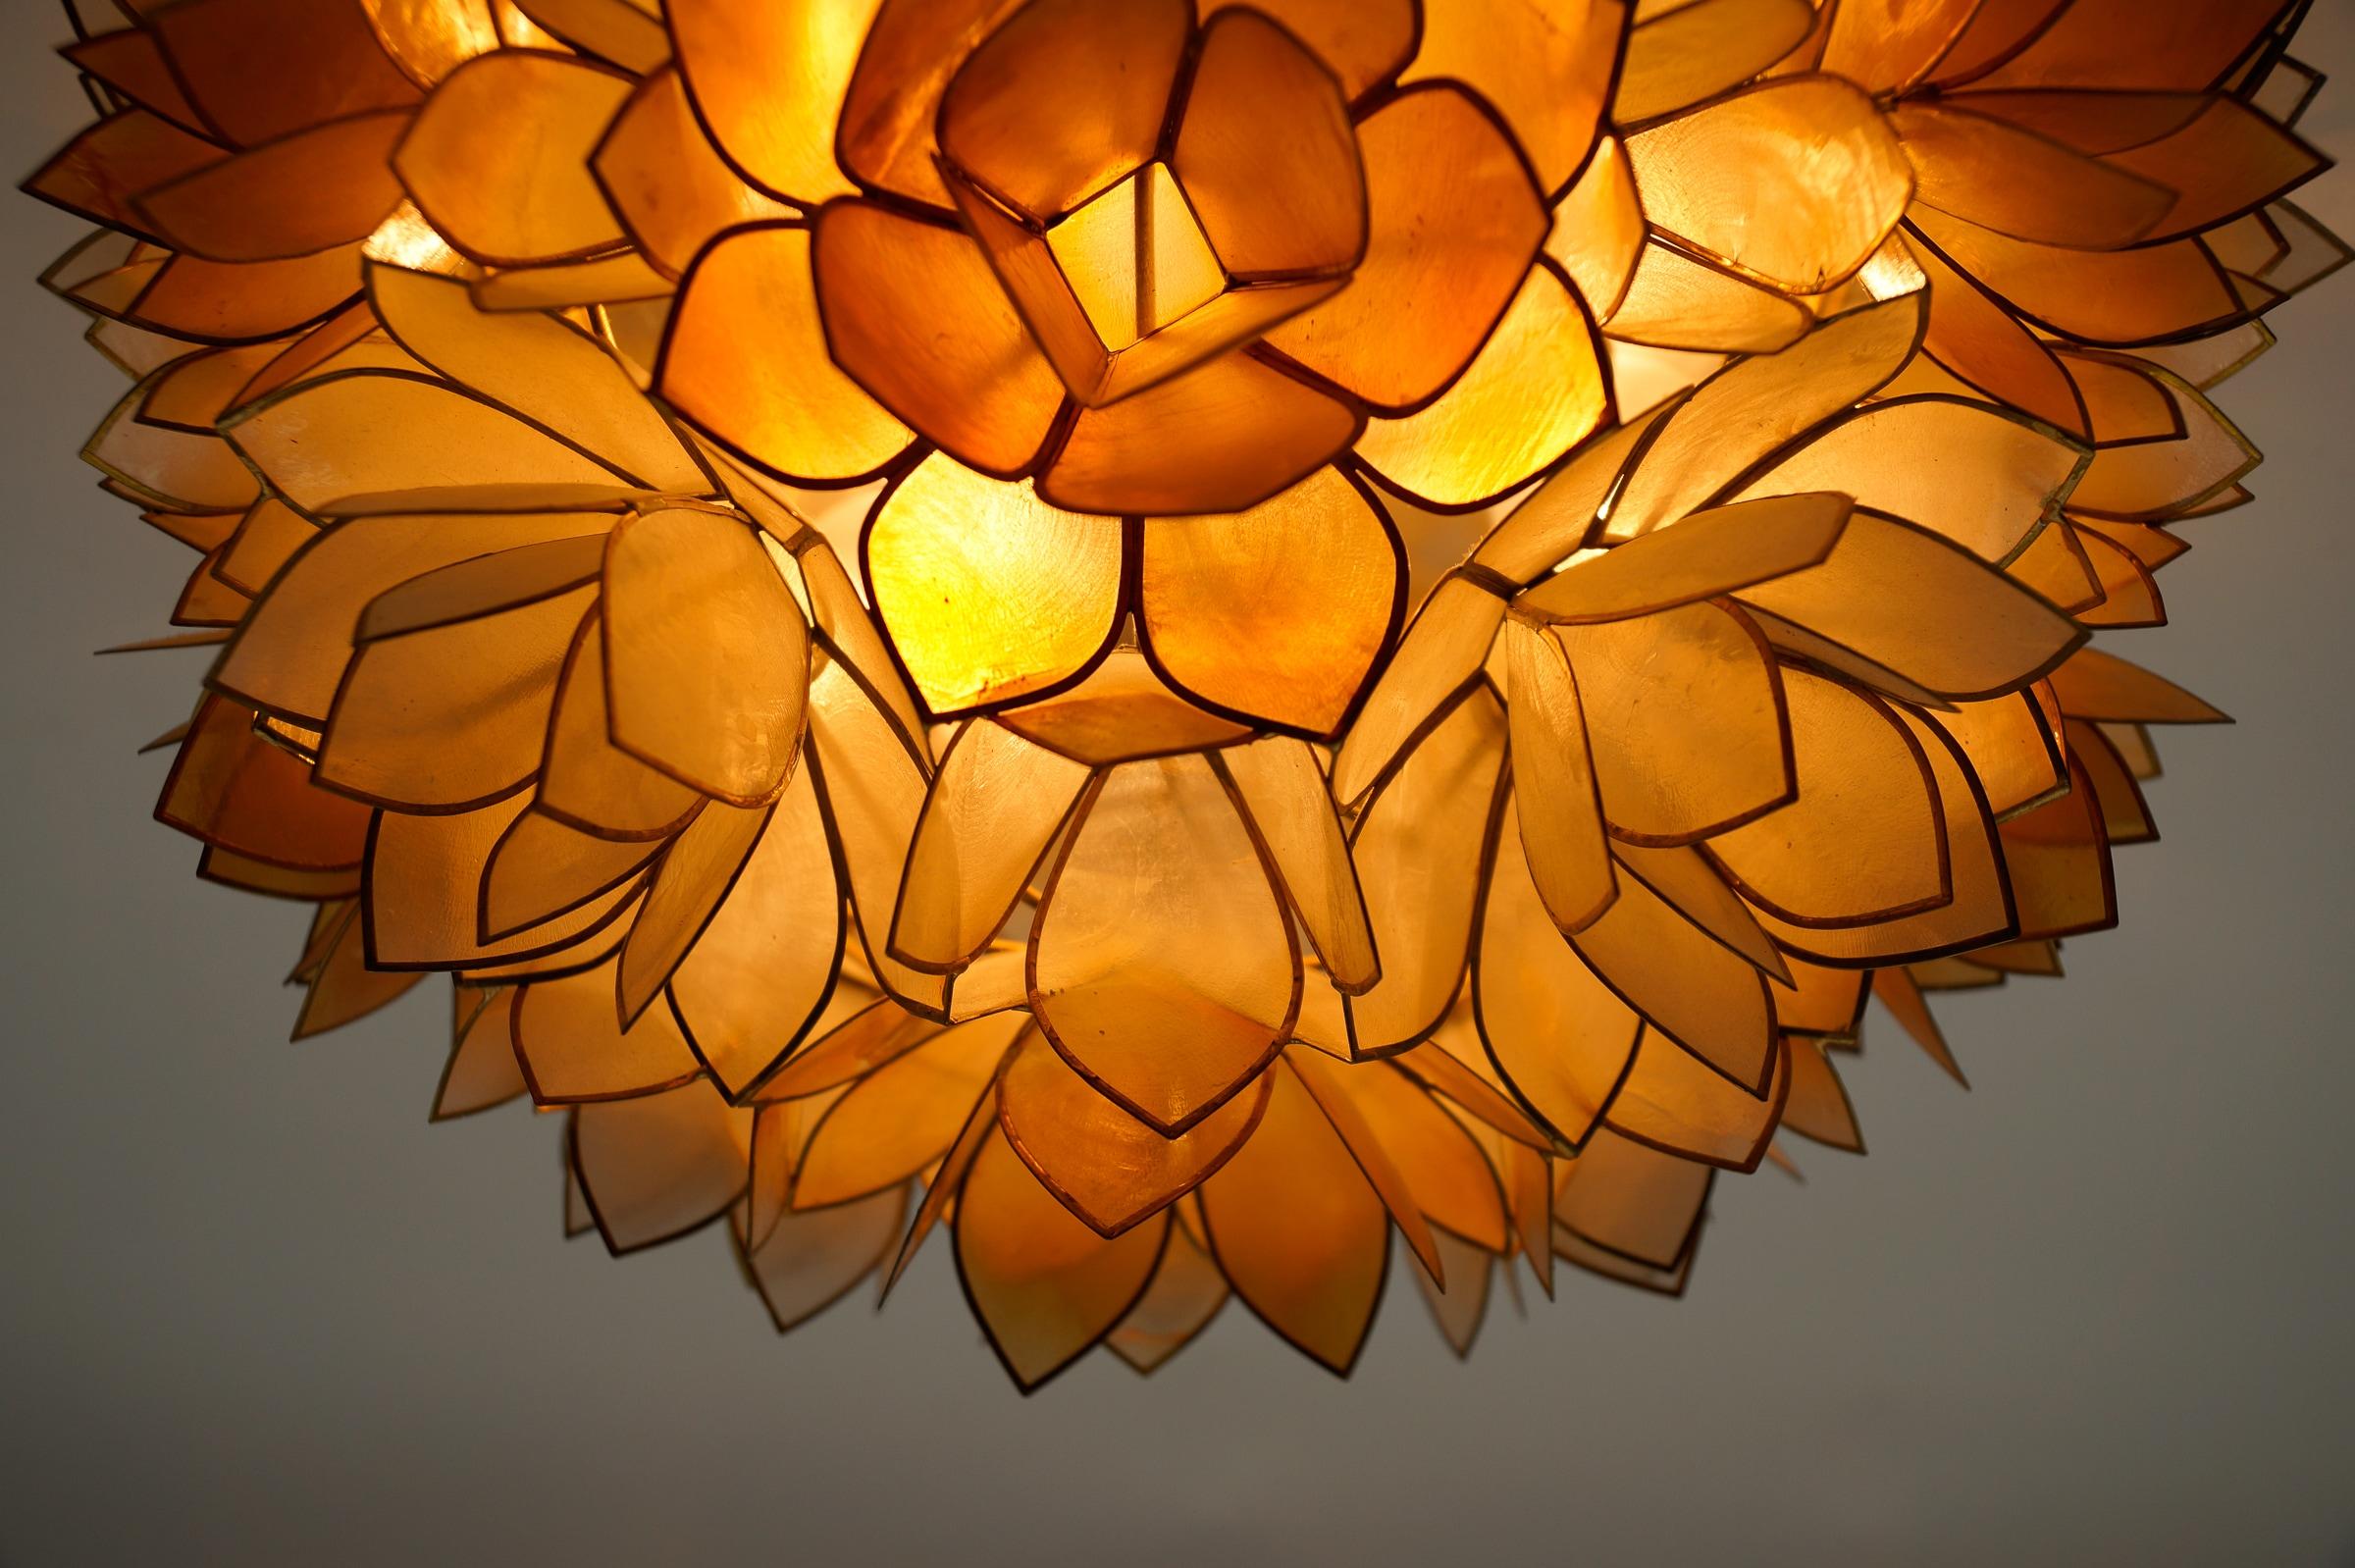 Flower Spherical Wall or Ceiling Lamps Made of Mother-of-Pearl in Orange, 1960s For Sale 3